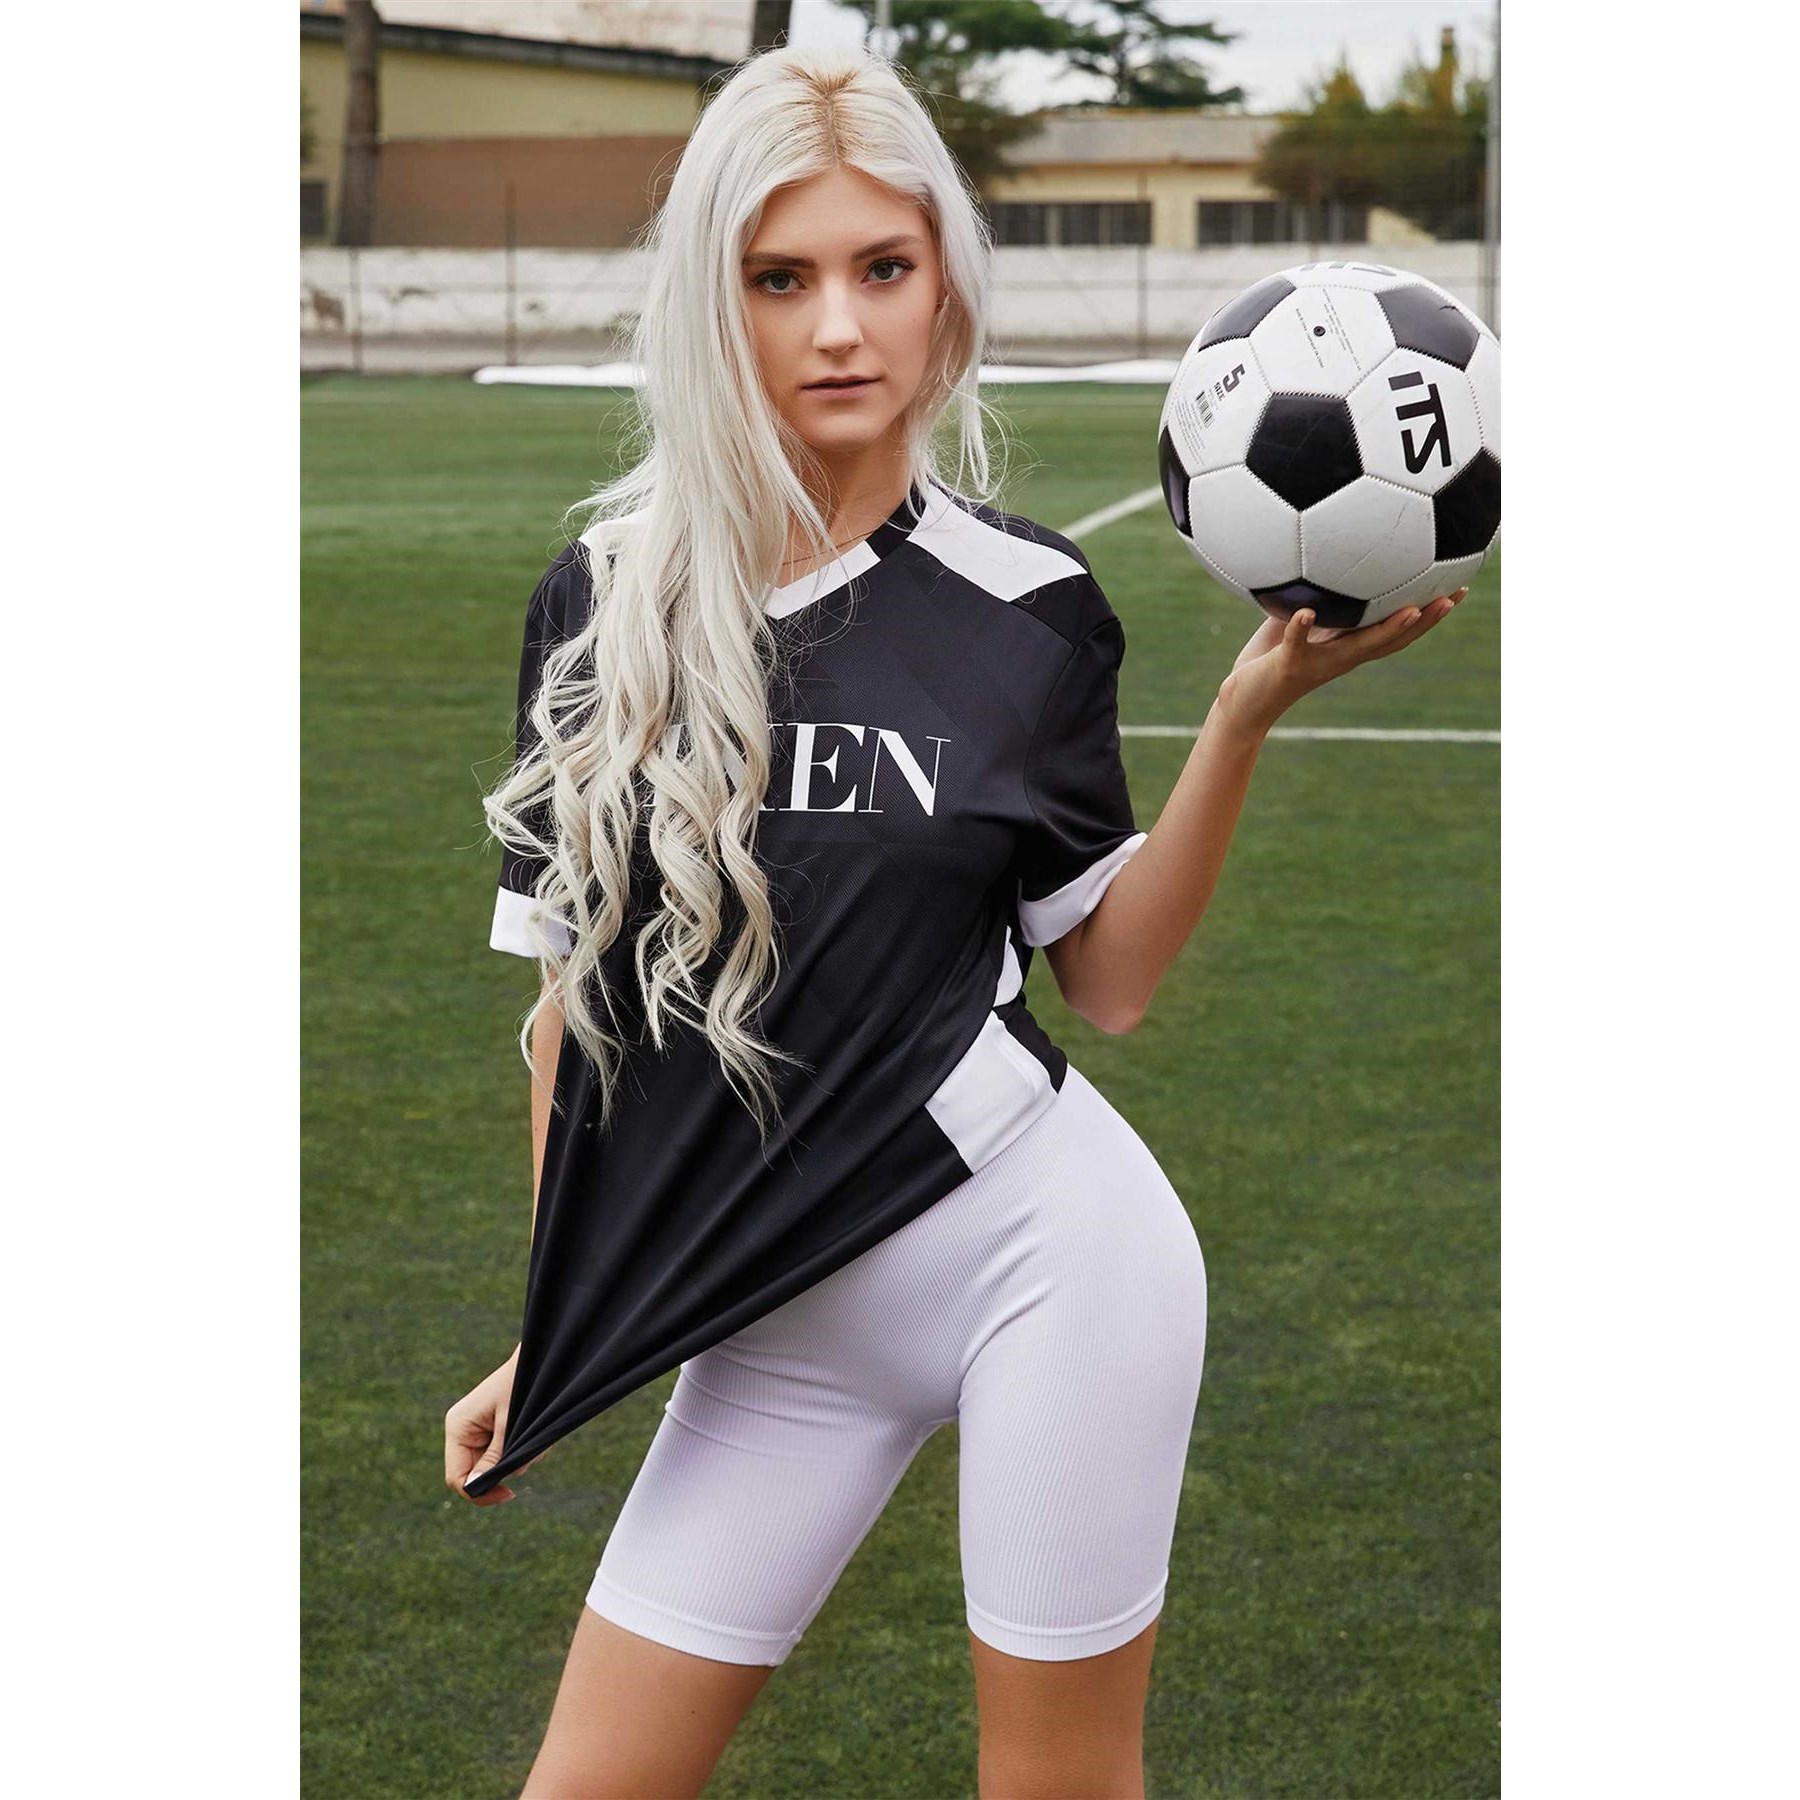 Blonde female posed wearing athletic uniform holding soccer ball